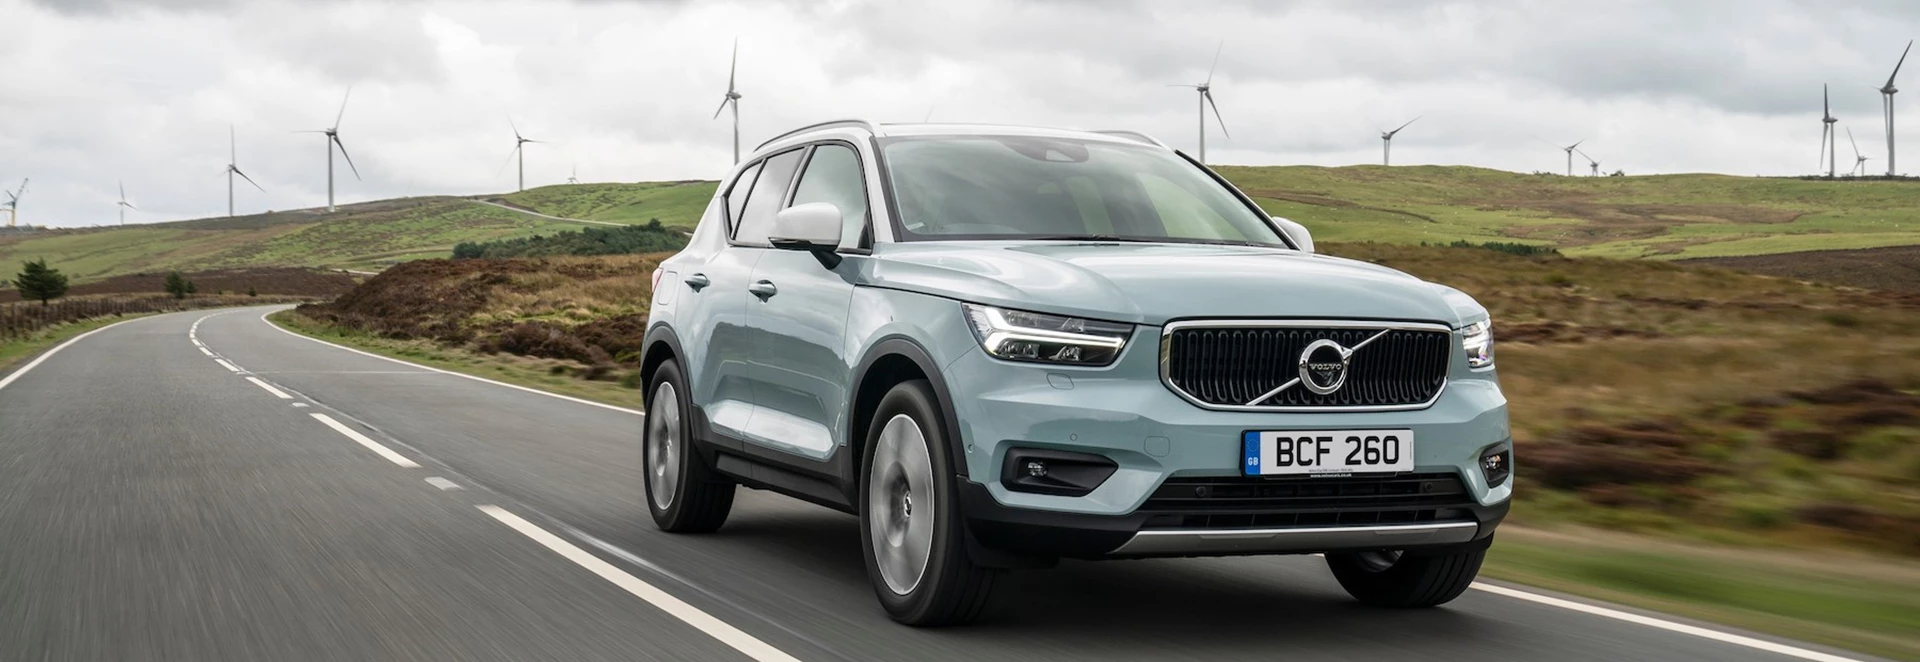 5 reasons why the Volvo XC40 should be on your SUV shortlist